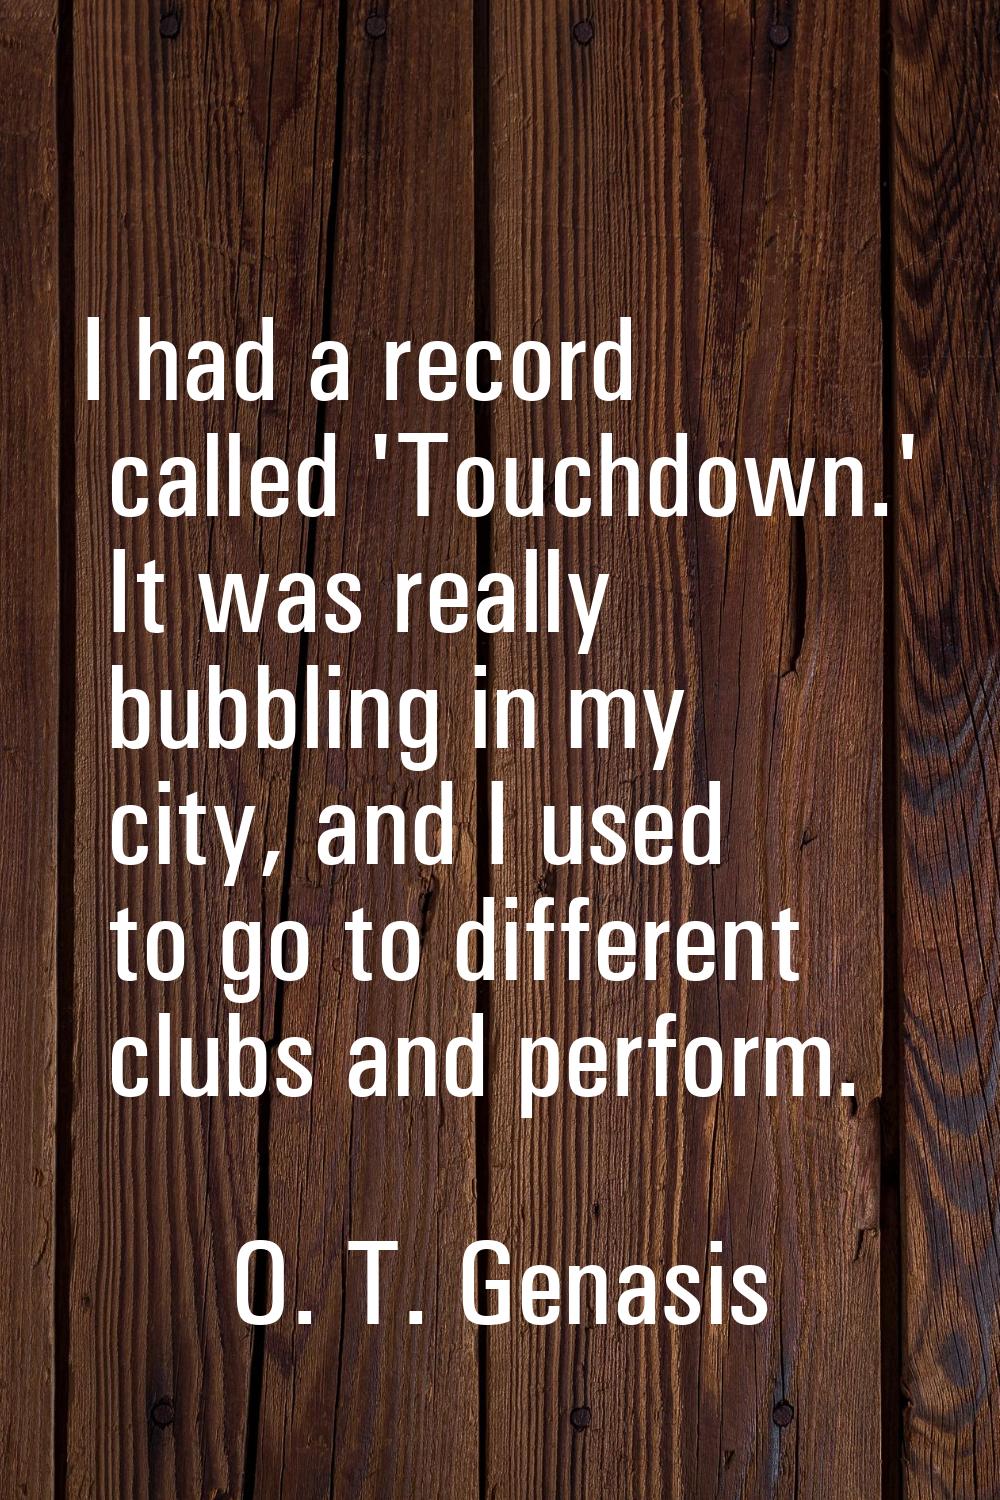 I had a record called 'Touchdown.' It was really bubbling in my city, and I used to go to different